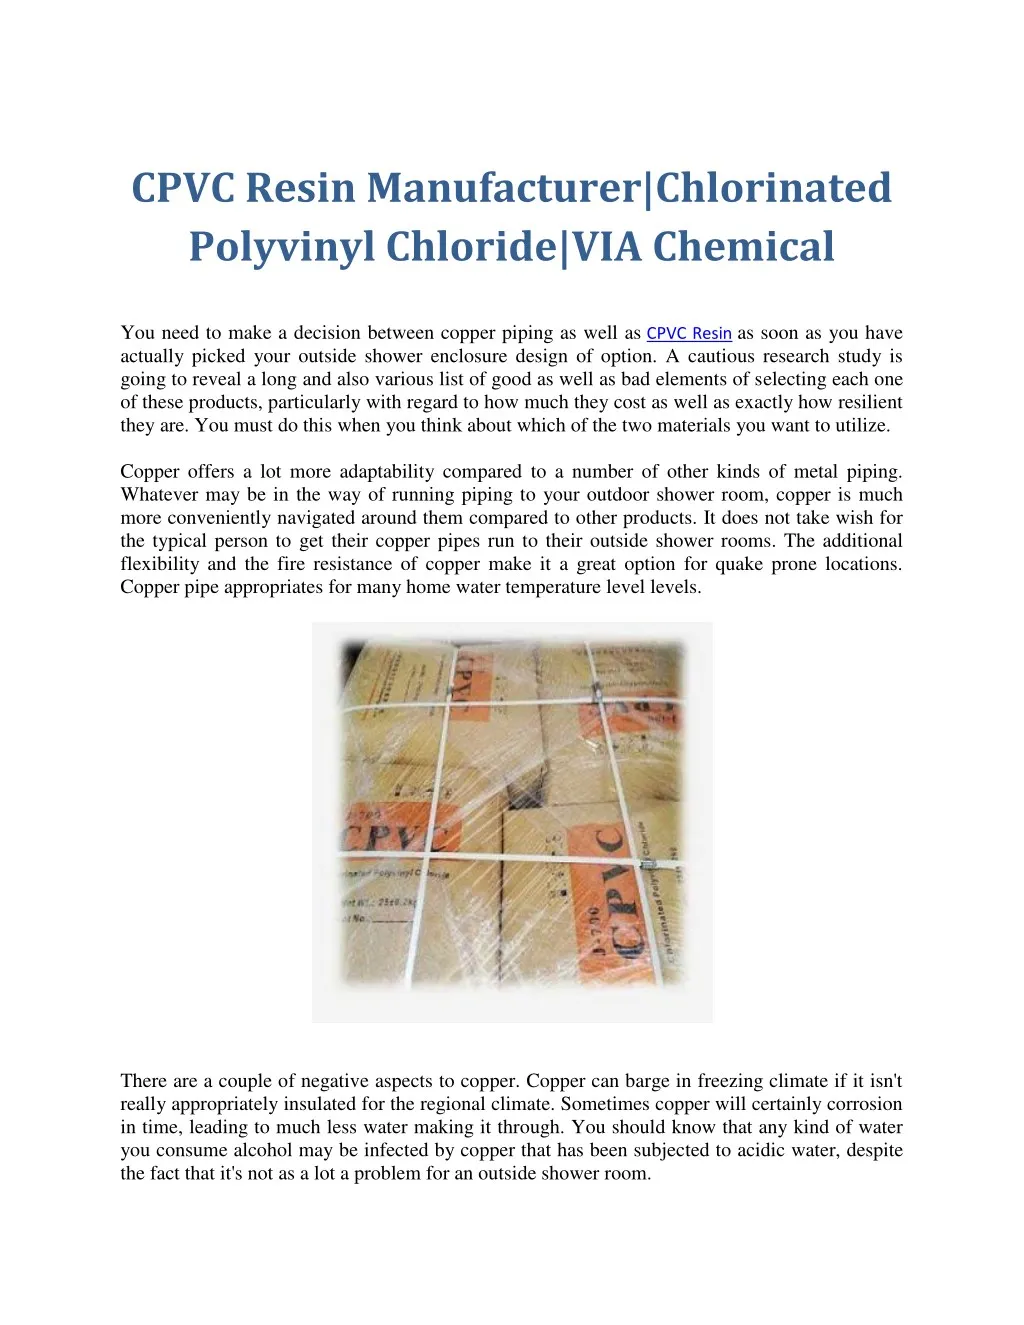 cpvc resin manufacturer chlorinated polyvinyl